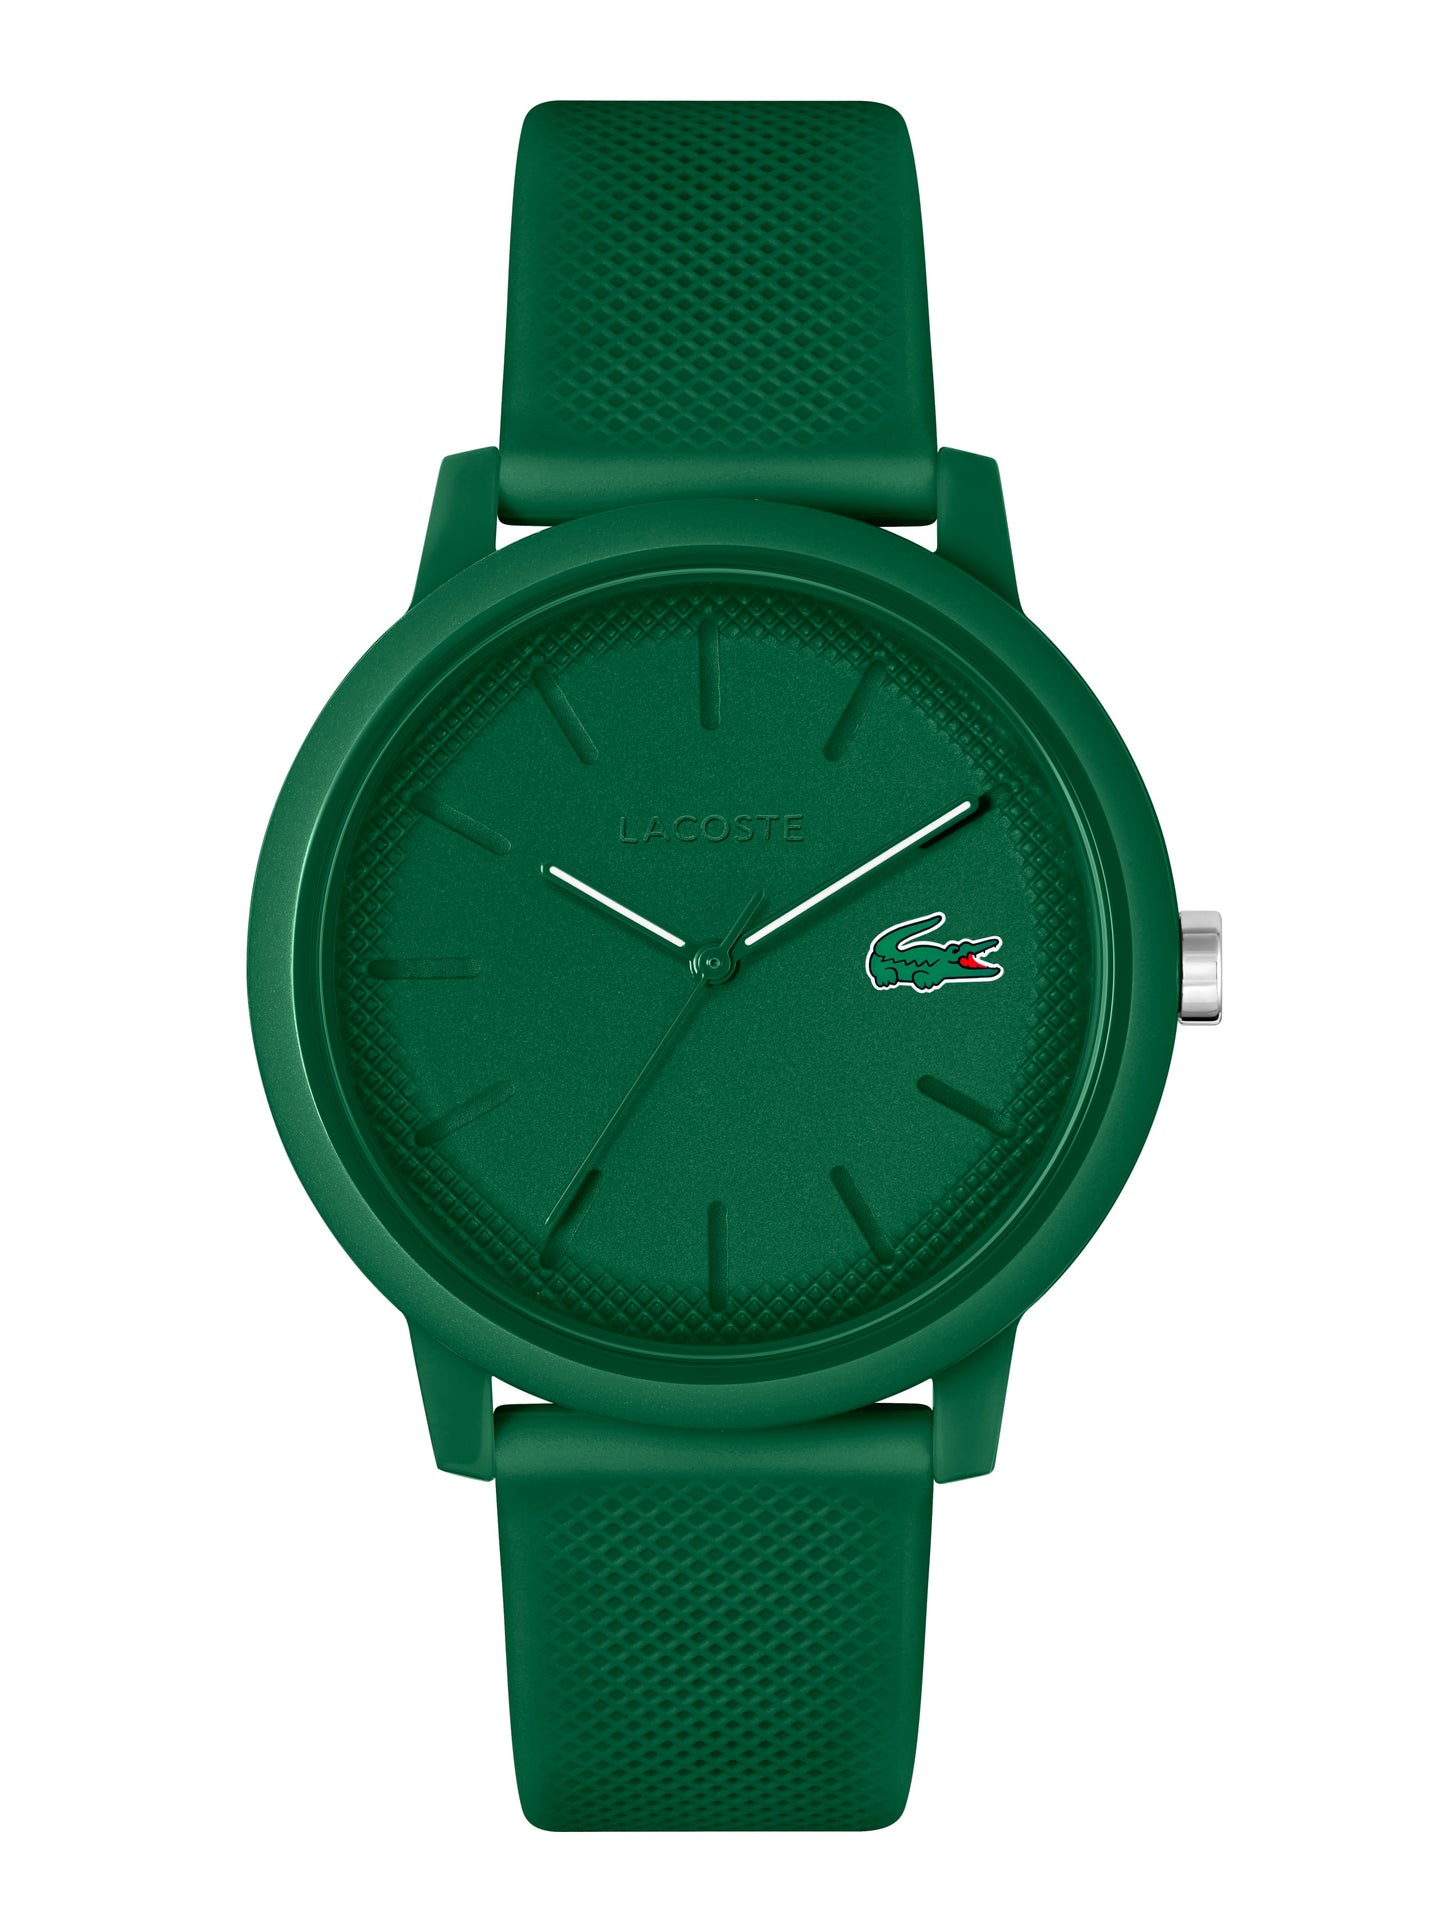 Lacoste men's 12.12 Green Watch 2011170, featuring a contemporary design with timeless elegance.